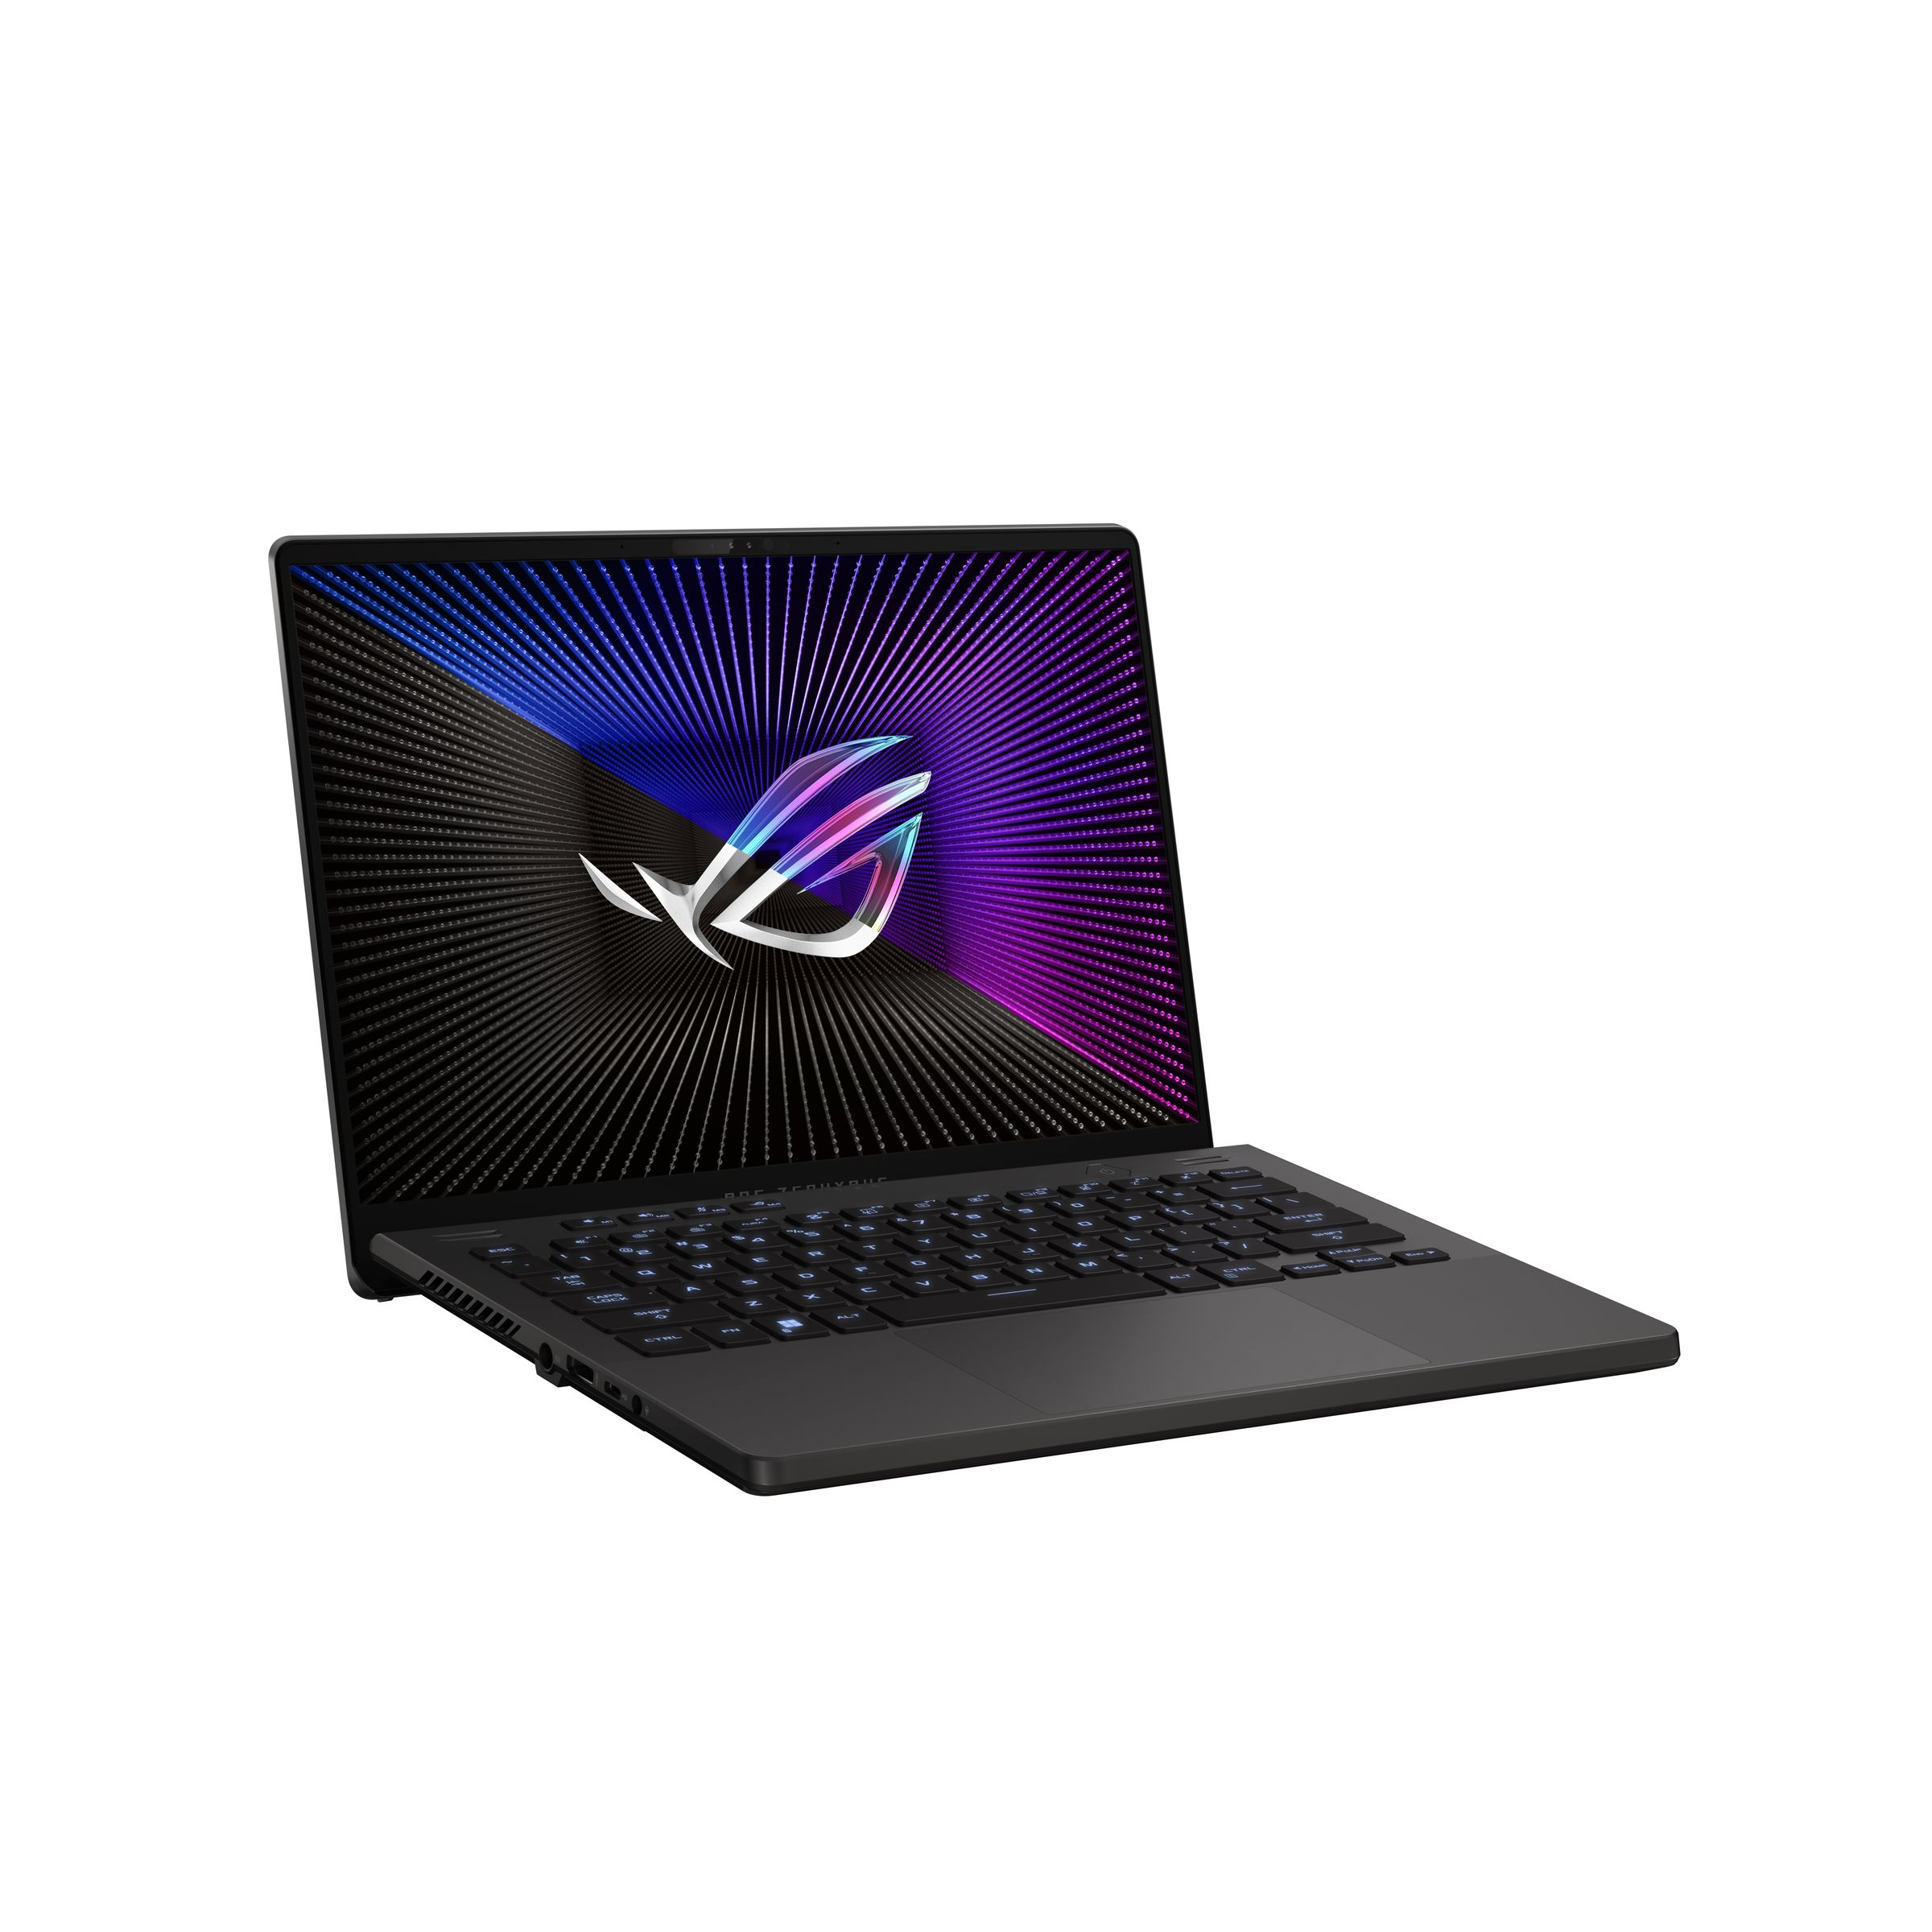 A black Zephyrus G14 model on a white background. The screen displays the Asus ROG logo.